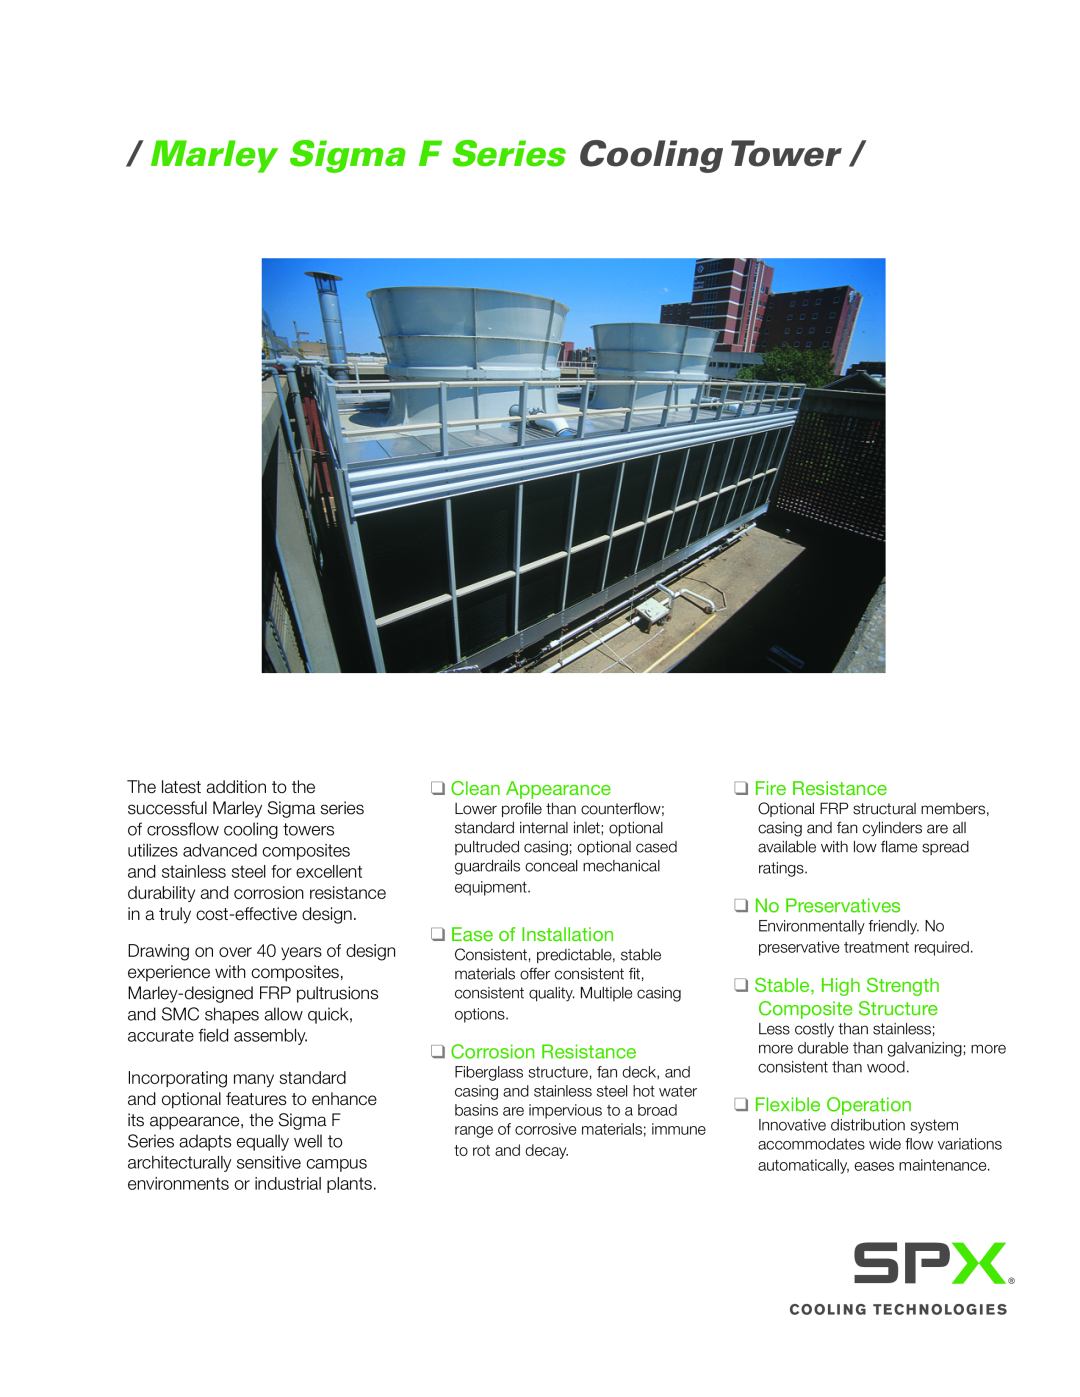 SPX Cooling Technologies manual Marley Sigma F Series Cooling Tower, Clean Appearance, Ease of Installation 